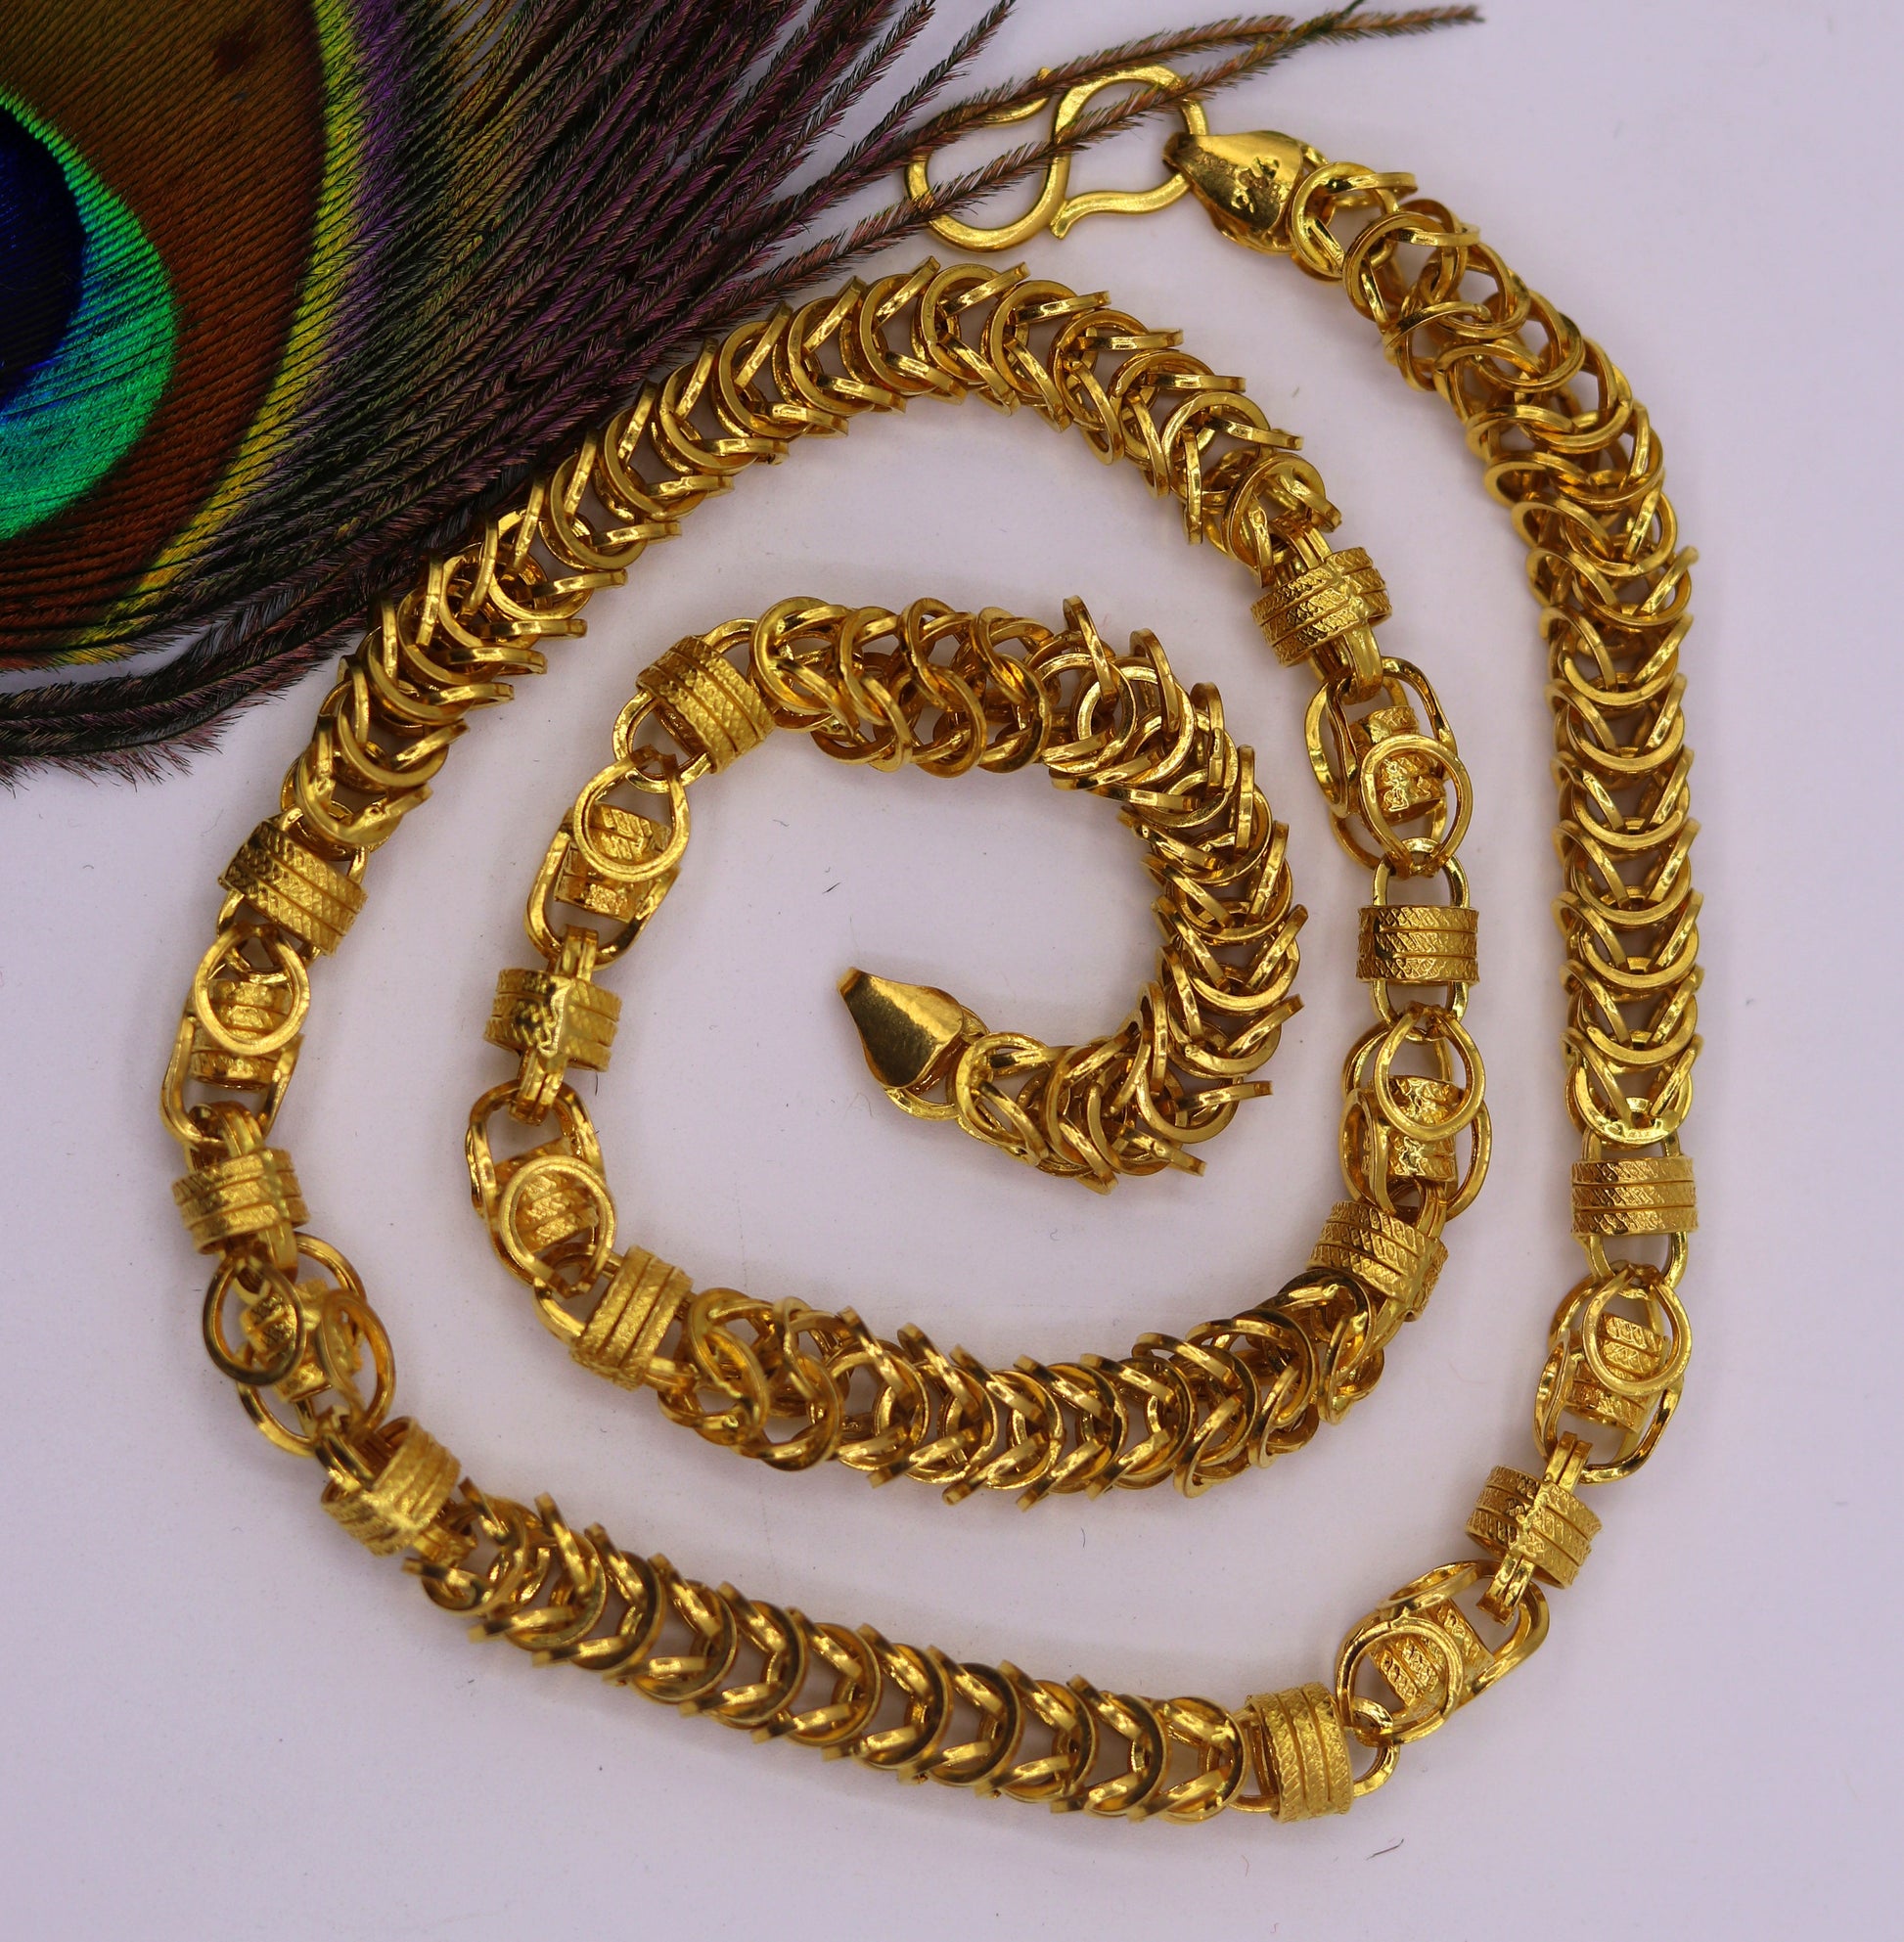 Genuine 22kt yellow gold handmade byzantine chain necklace with gorgeous antique design 7 mm chain ch186 - TRIBAL ORNAMENTS